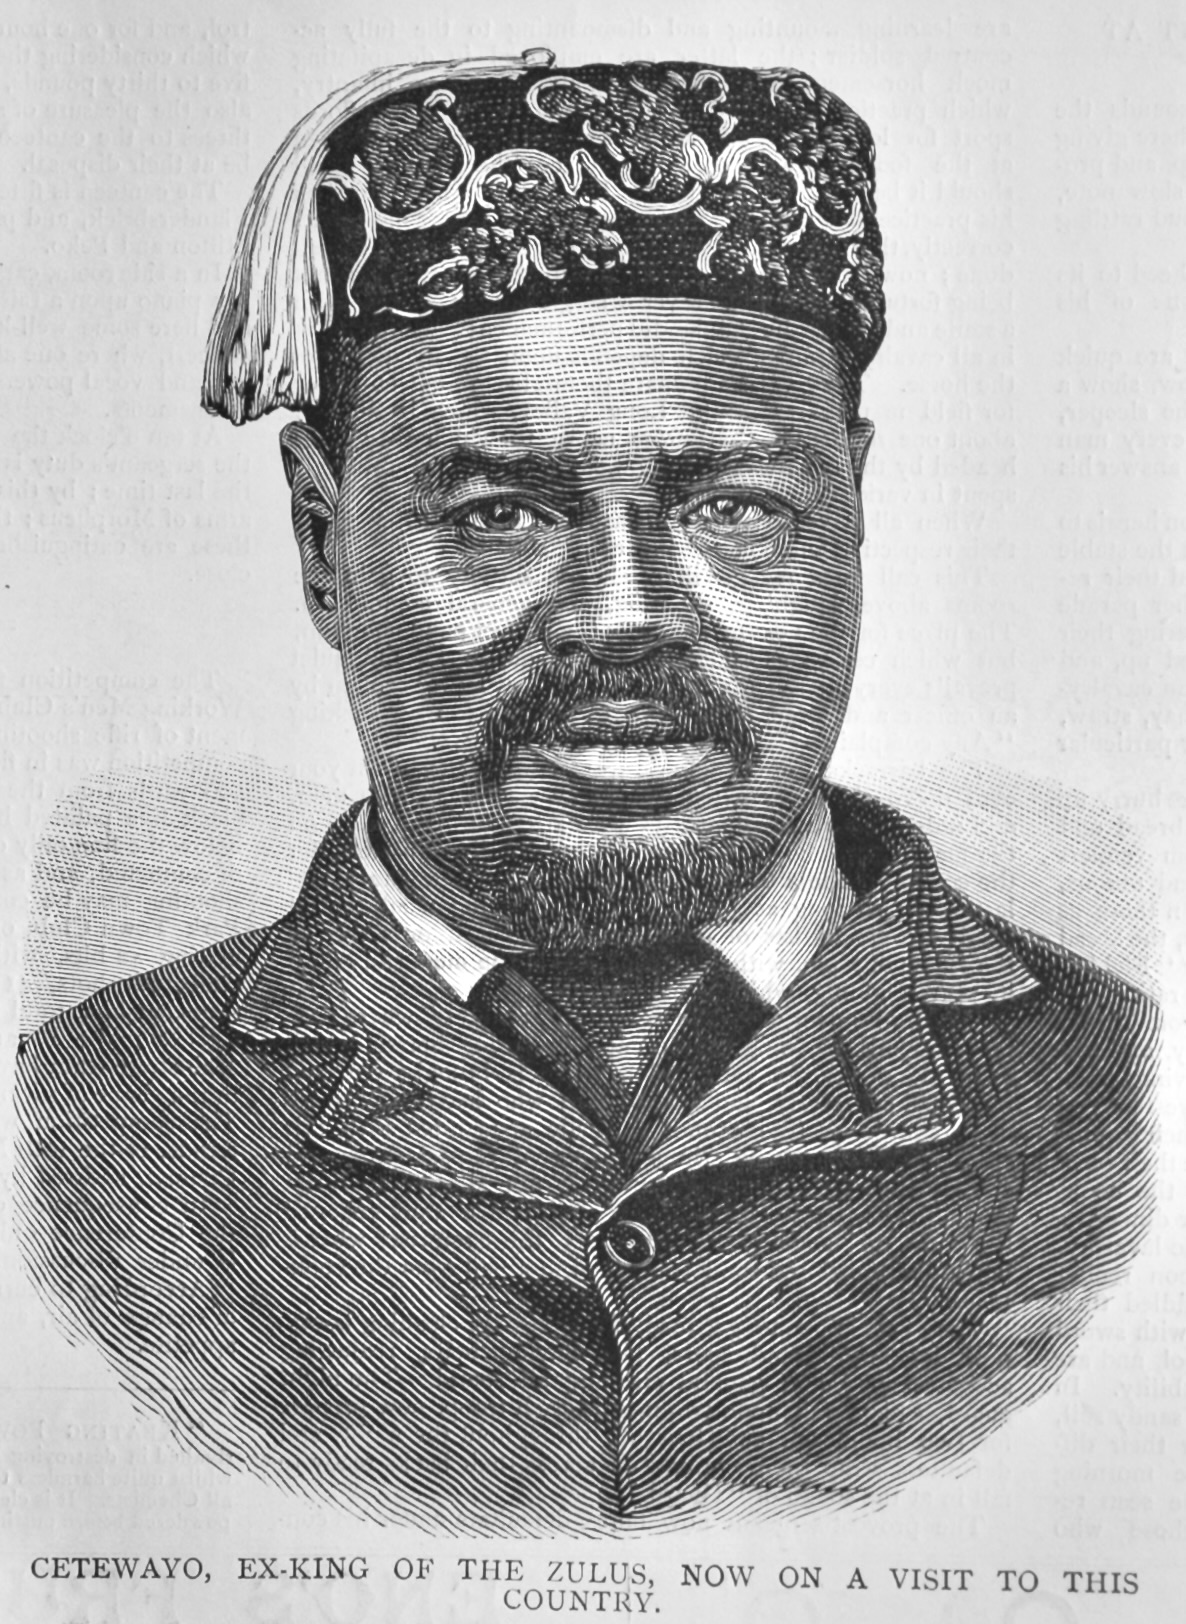 Cetewayo,  Ex-King of the Zulus, now on a Visit to this Country.  1882.